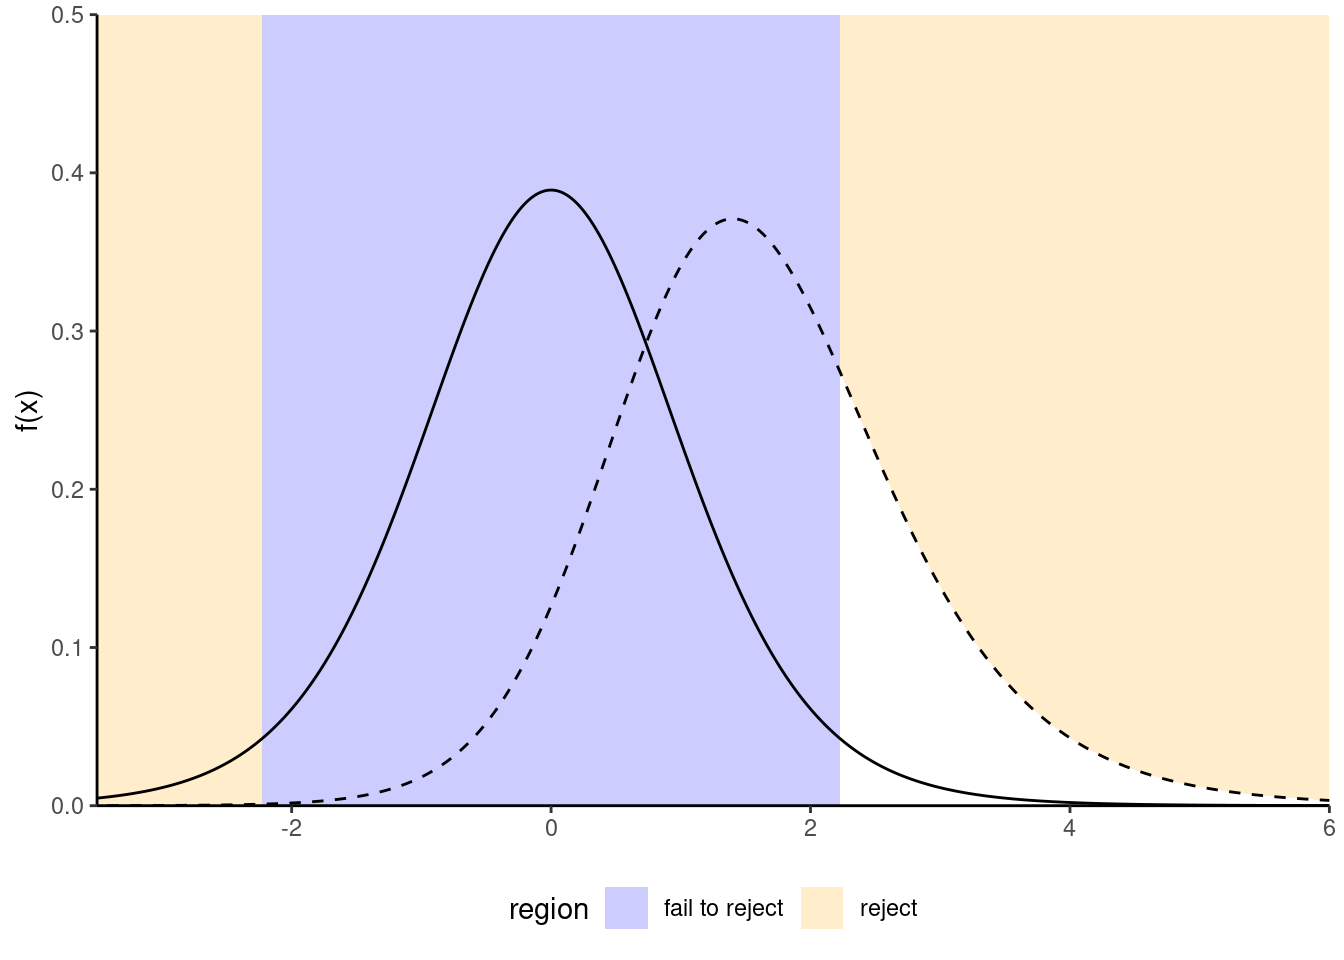 Comparison between null distribution (full curve) and a specific alternative for a *t*-test (dashed line). The power corresponds to the area under the curve of the density of the alternative distribution which is in the rejection area (in white).